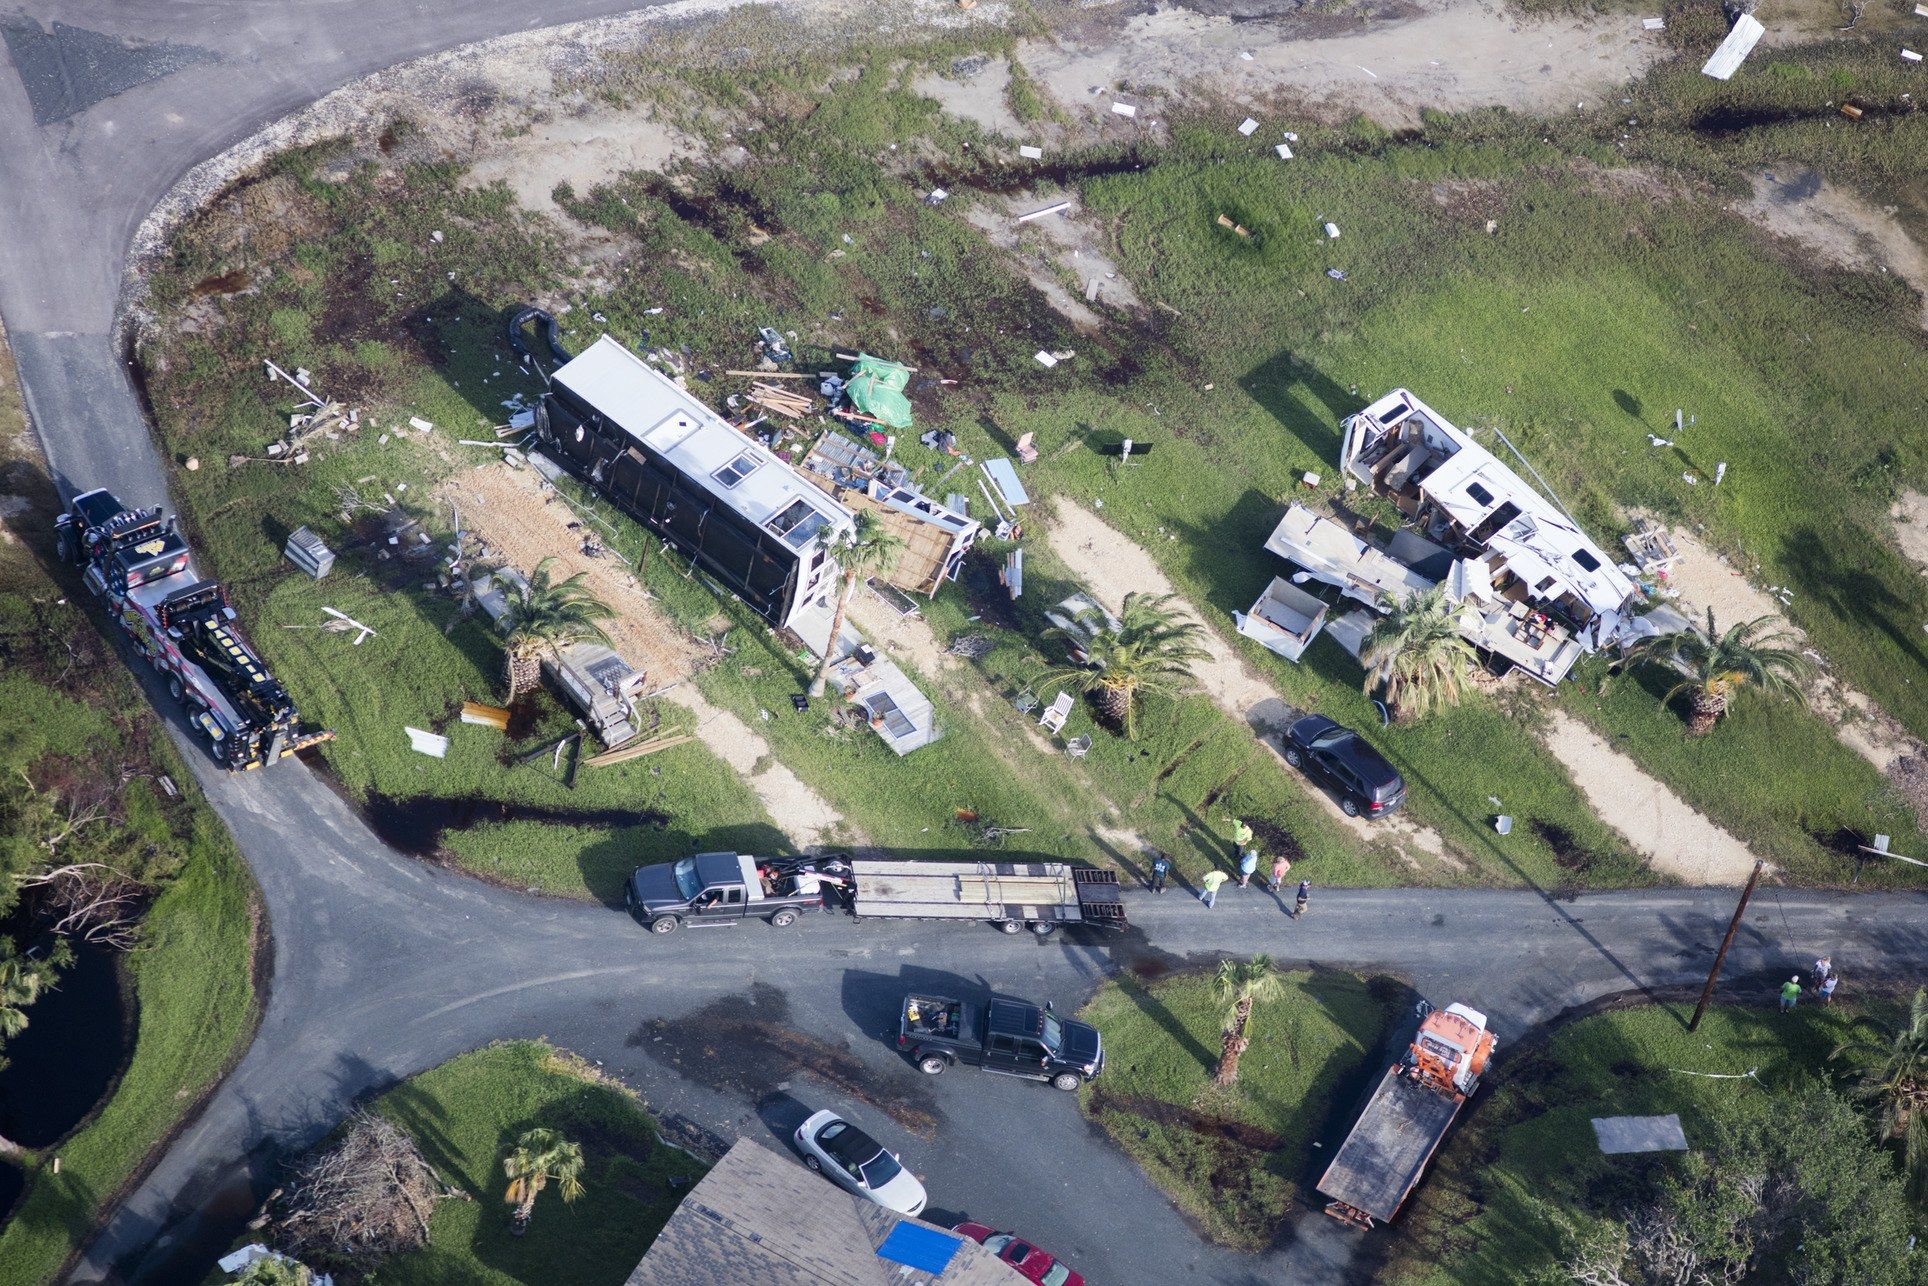 When Harvey made landfall in Rockport, Texas, powerful tornadoes appeared, ripping apart and overturning mobile homes. Image by Alex MacLean. United States, 2017. 